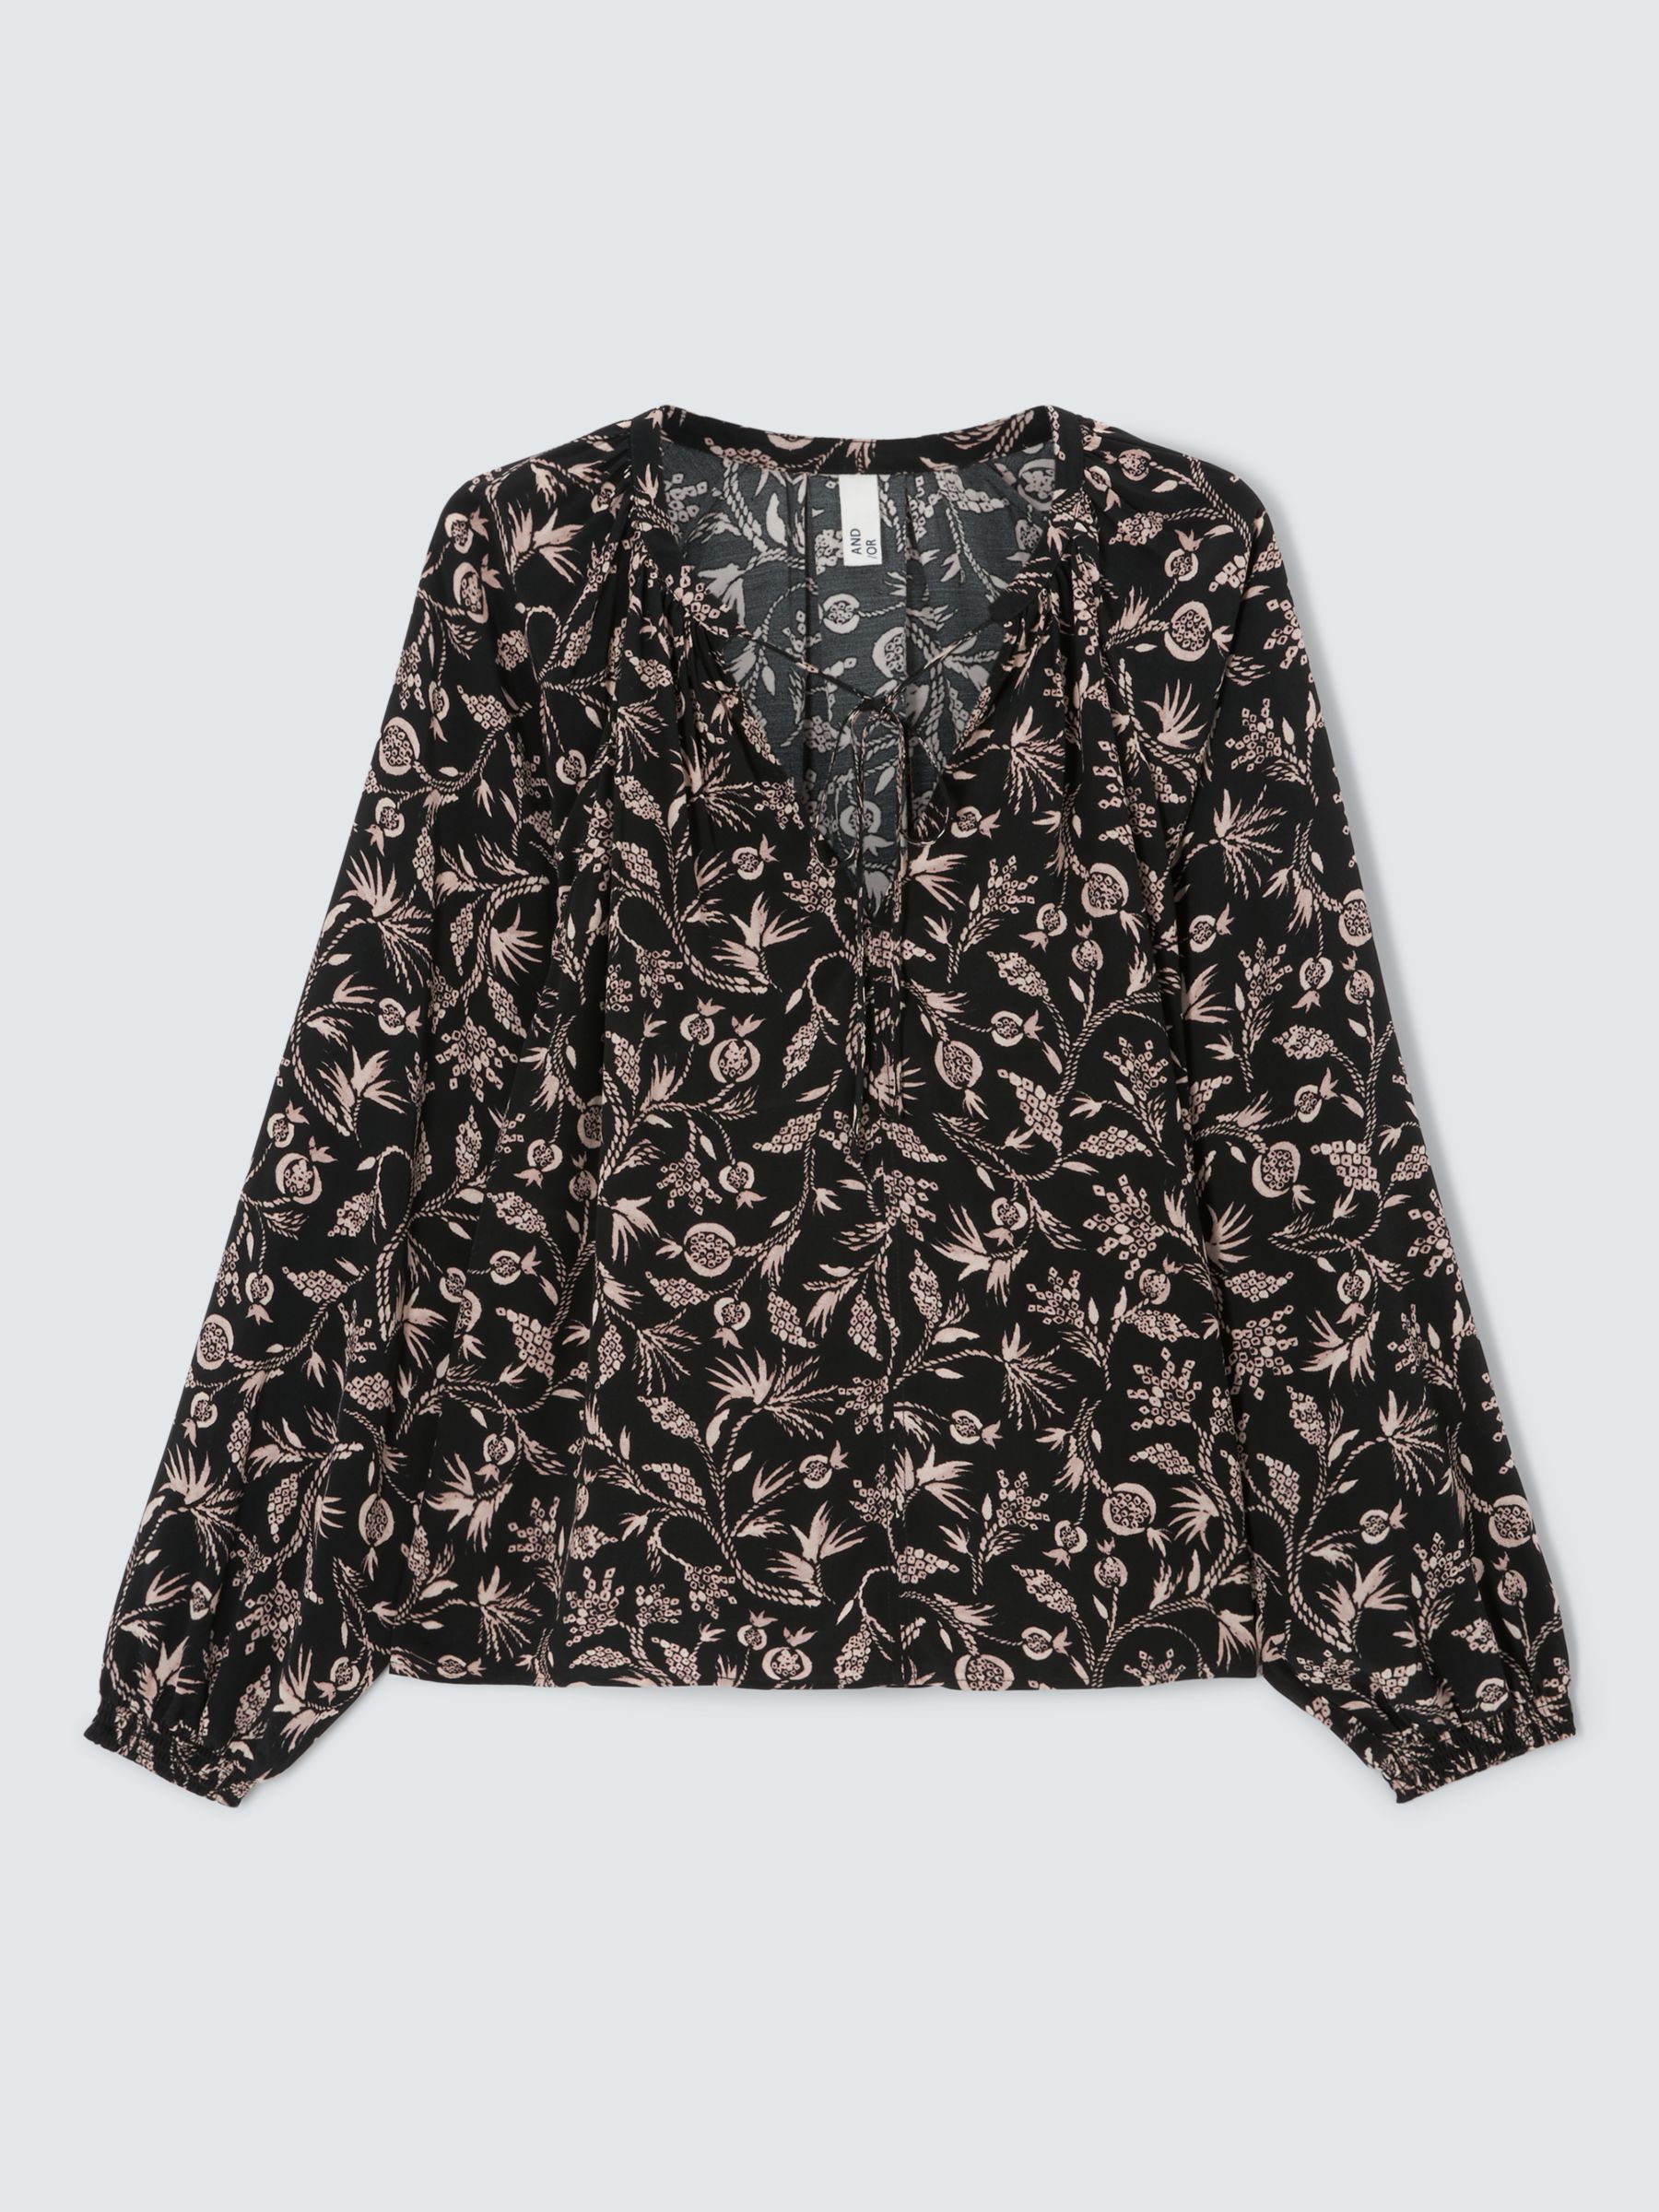 AND/OR Lucinda Floral Blouse, Black/Multi at John Lewis & Partners